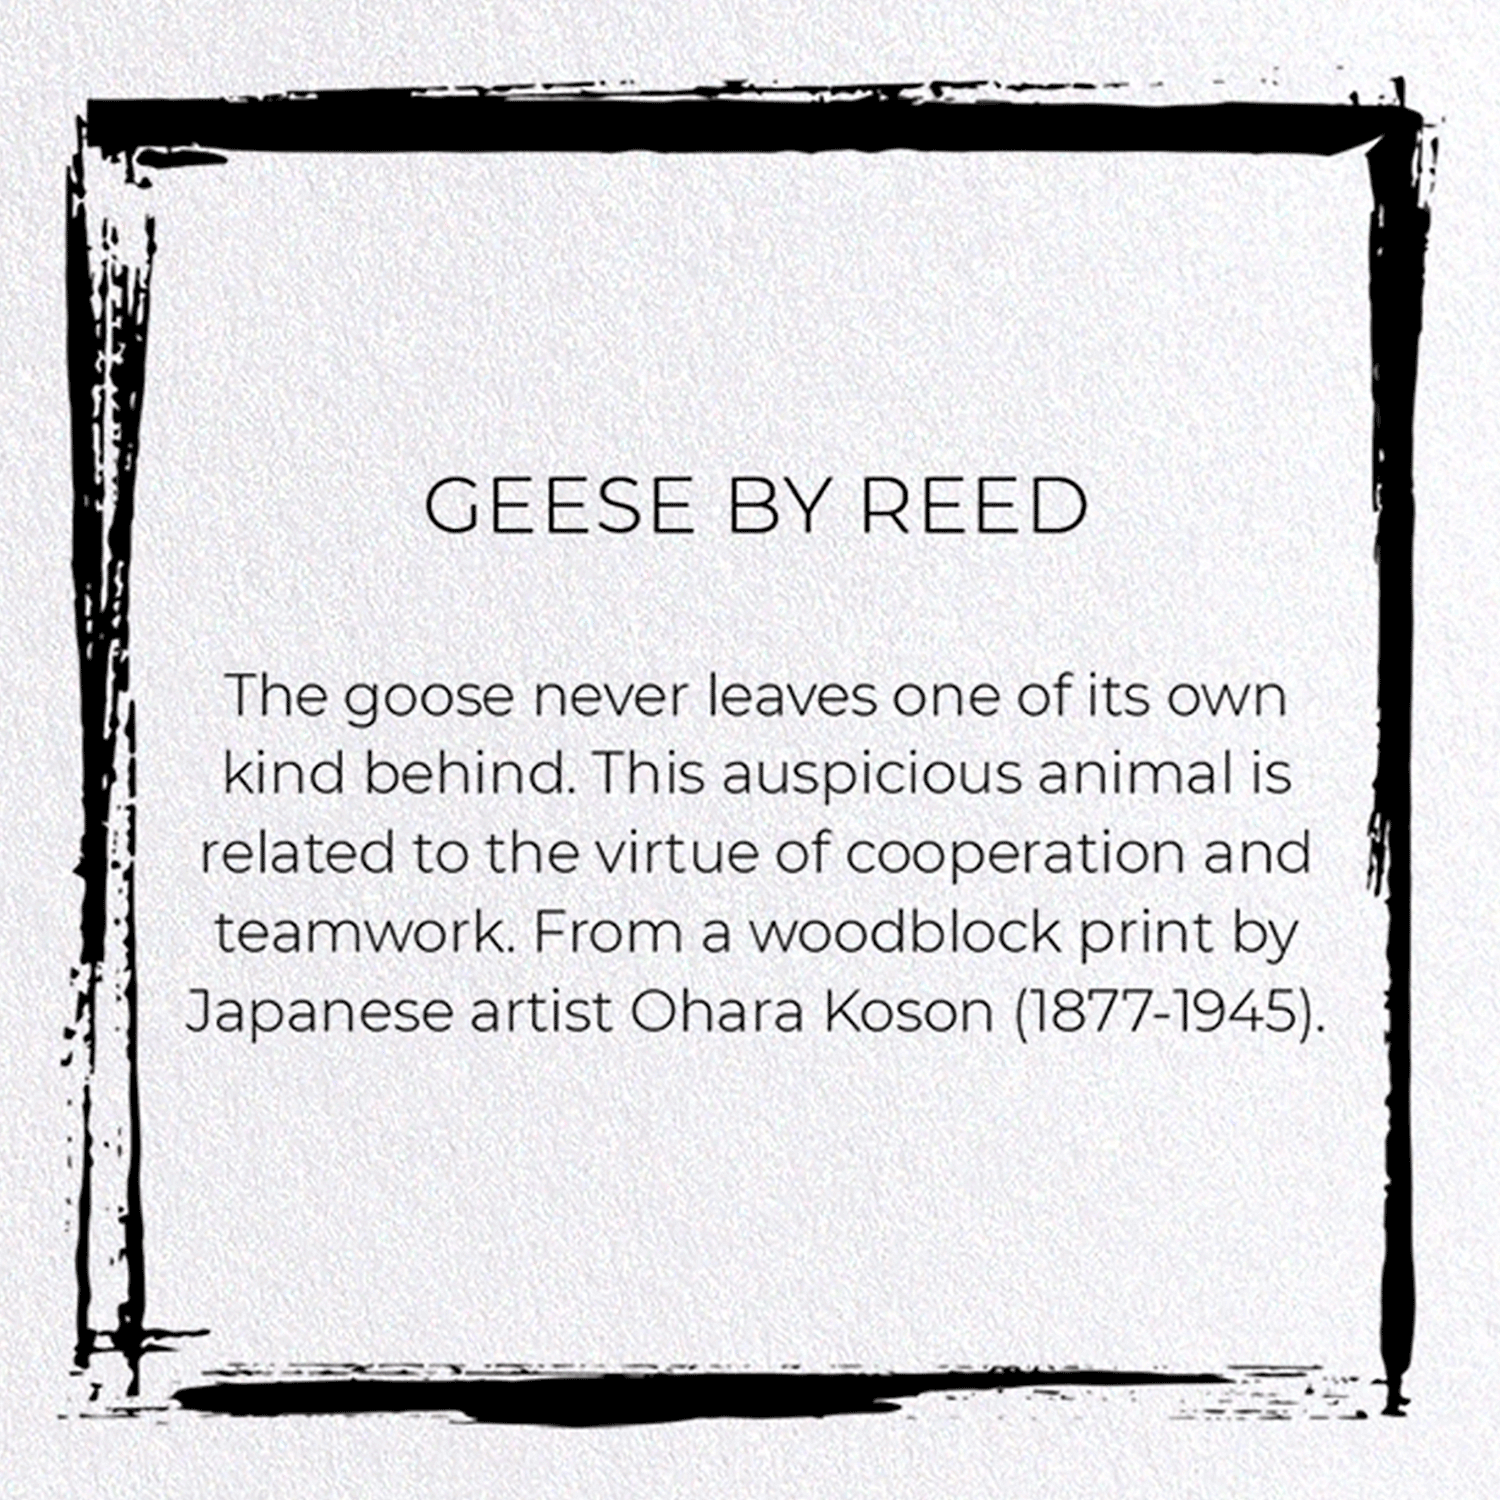 GEESE BY REED